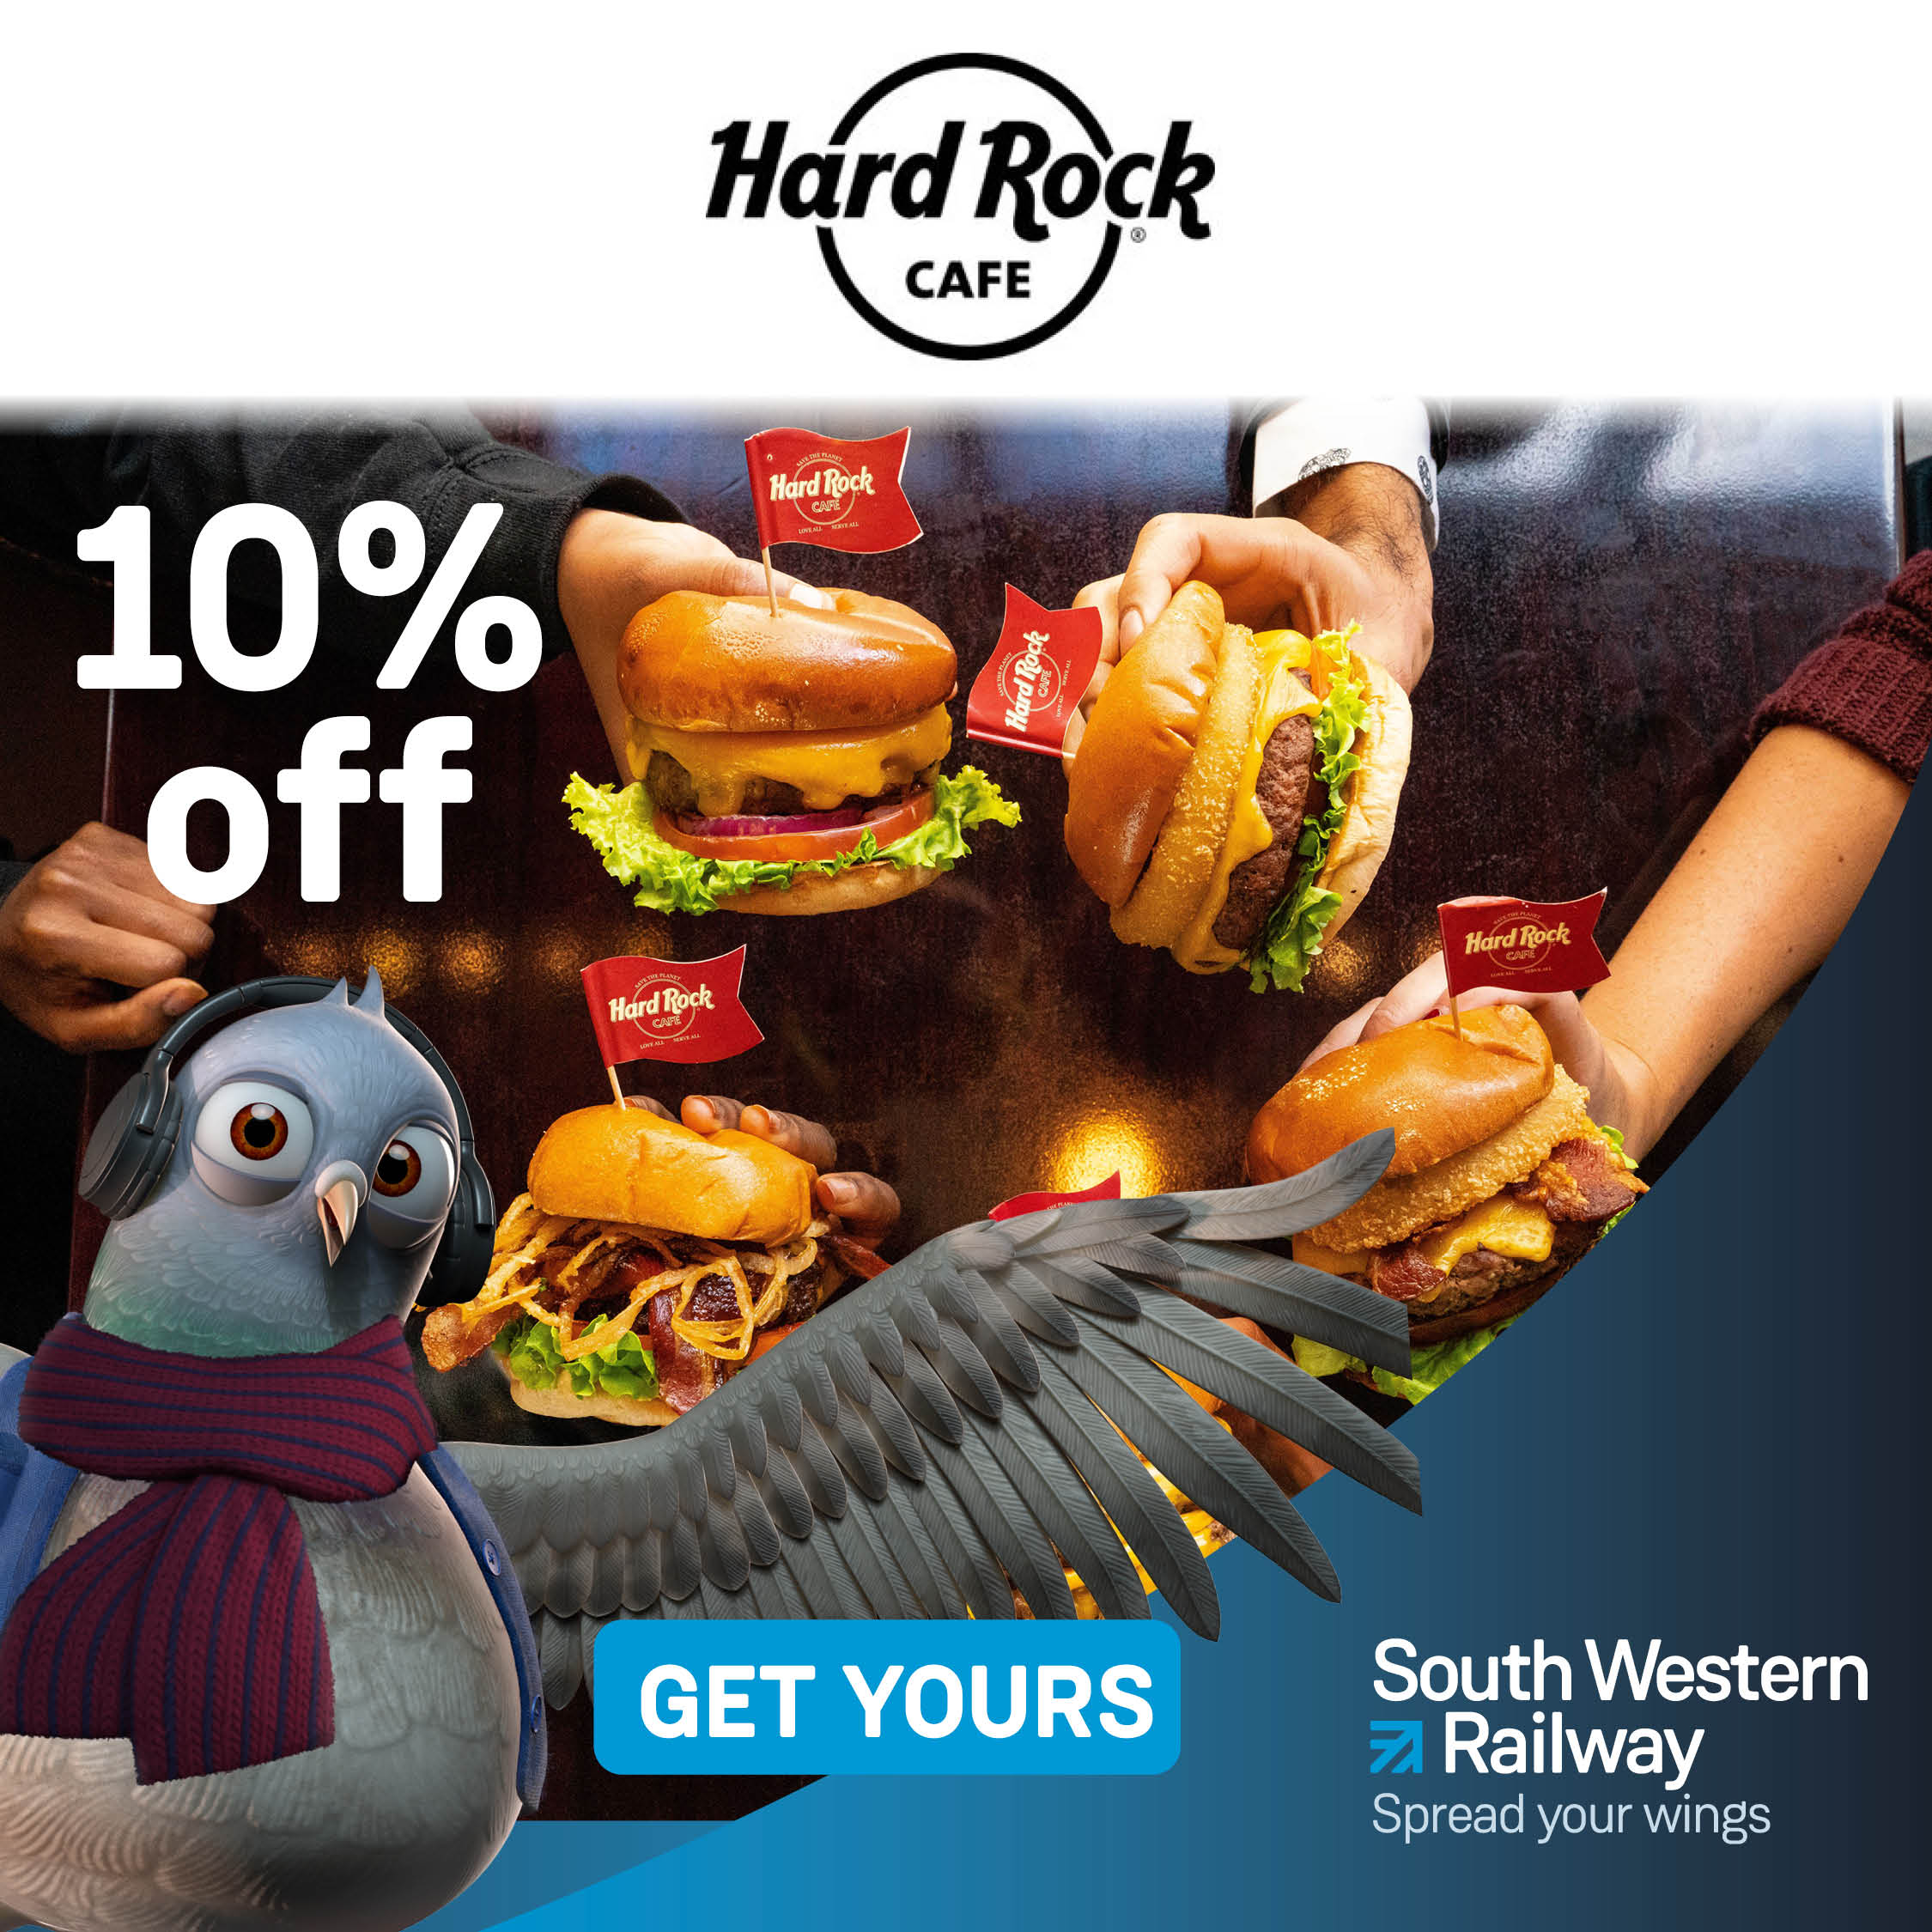 10% off Hard Rock Cafe with SWR Rewards from South Western Railway